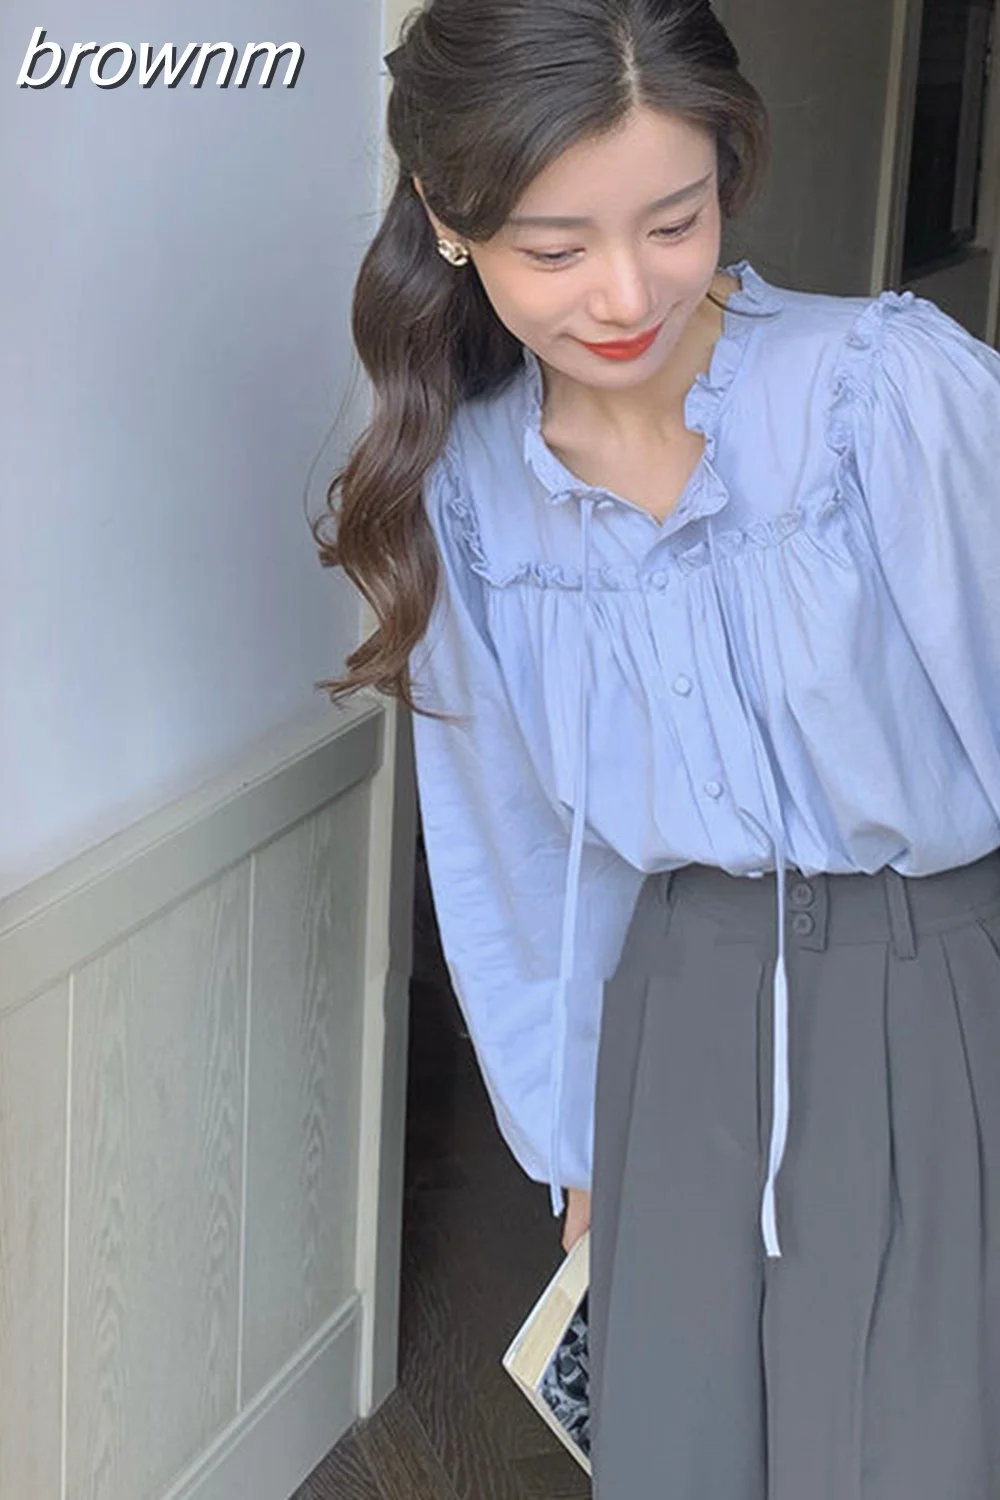 brownm Bow Shirt Women Early Autumn Unique Solid Relaxed Casual Shirt Lace-up Blue Premium Feeling Folding Loose Top